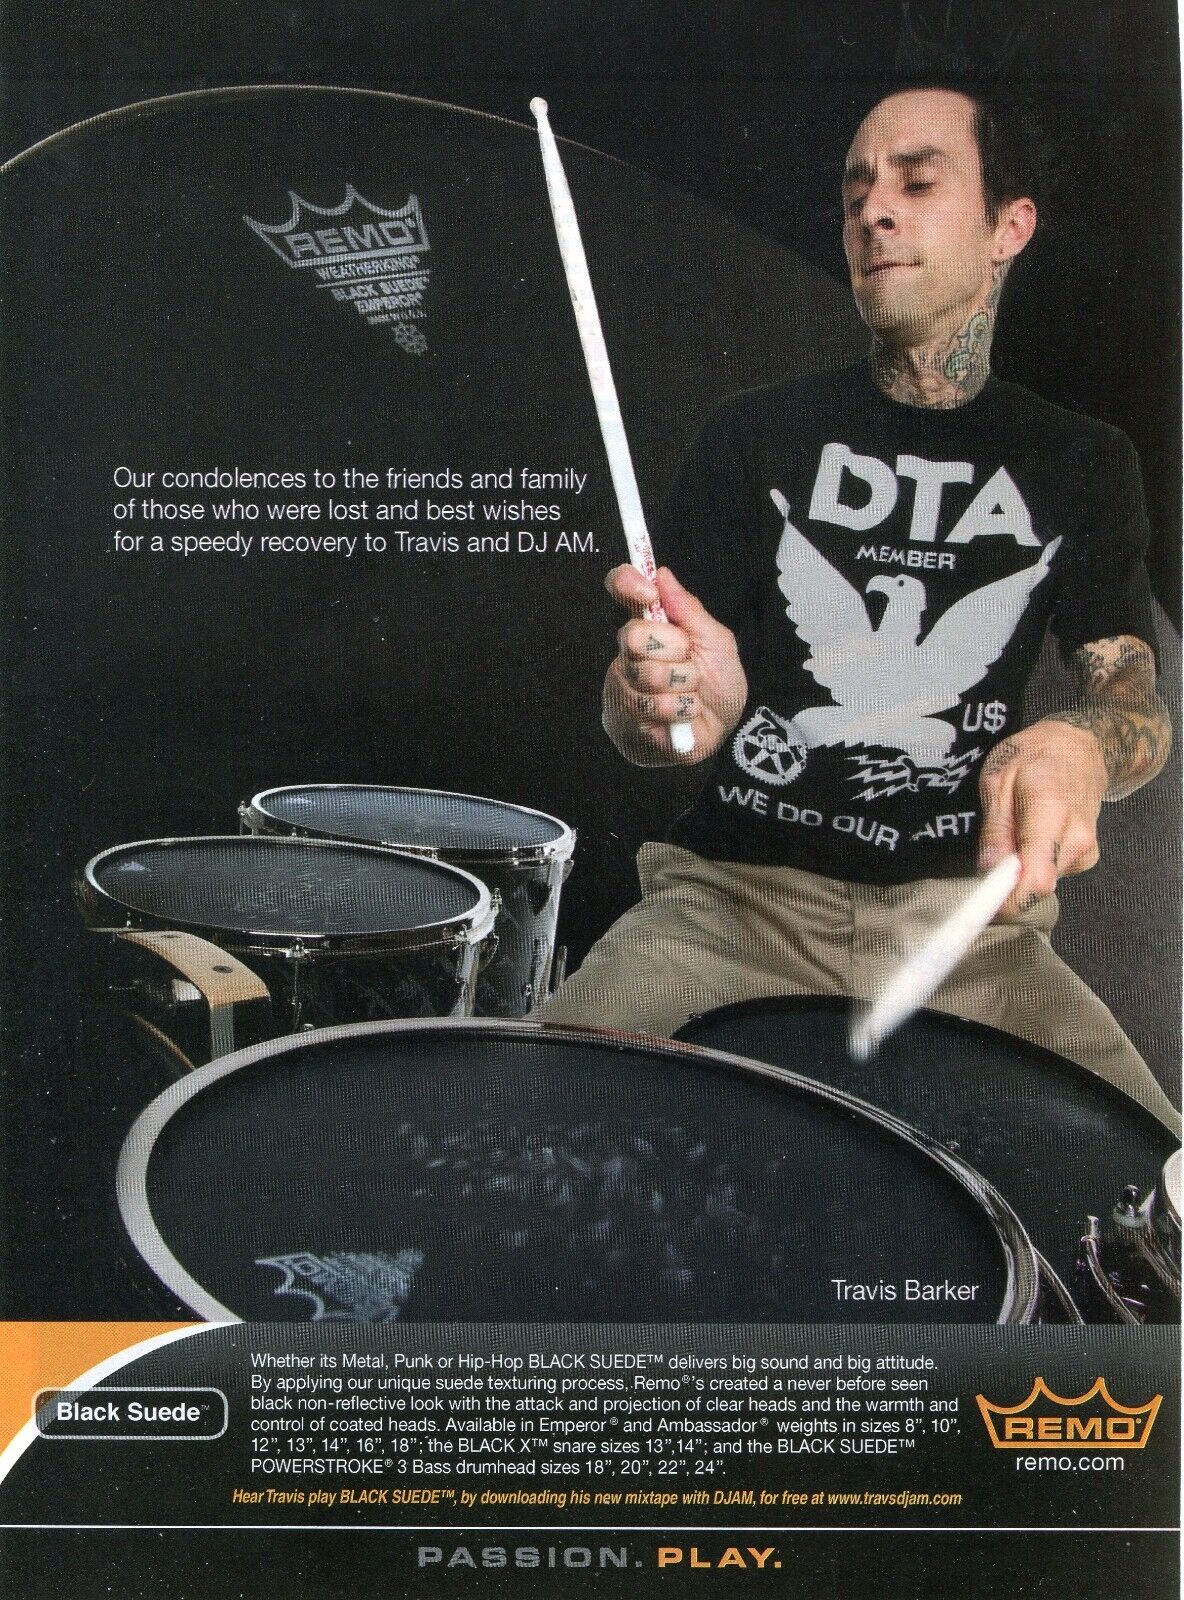 2008 Print Ad of Remo Drumheads Travis Barker DJ AM Best Wishes & Condolences